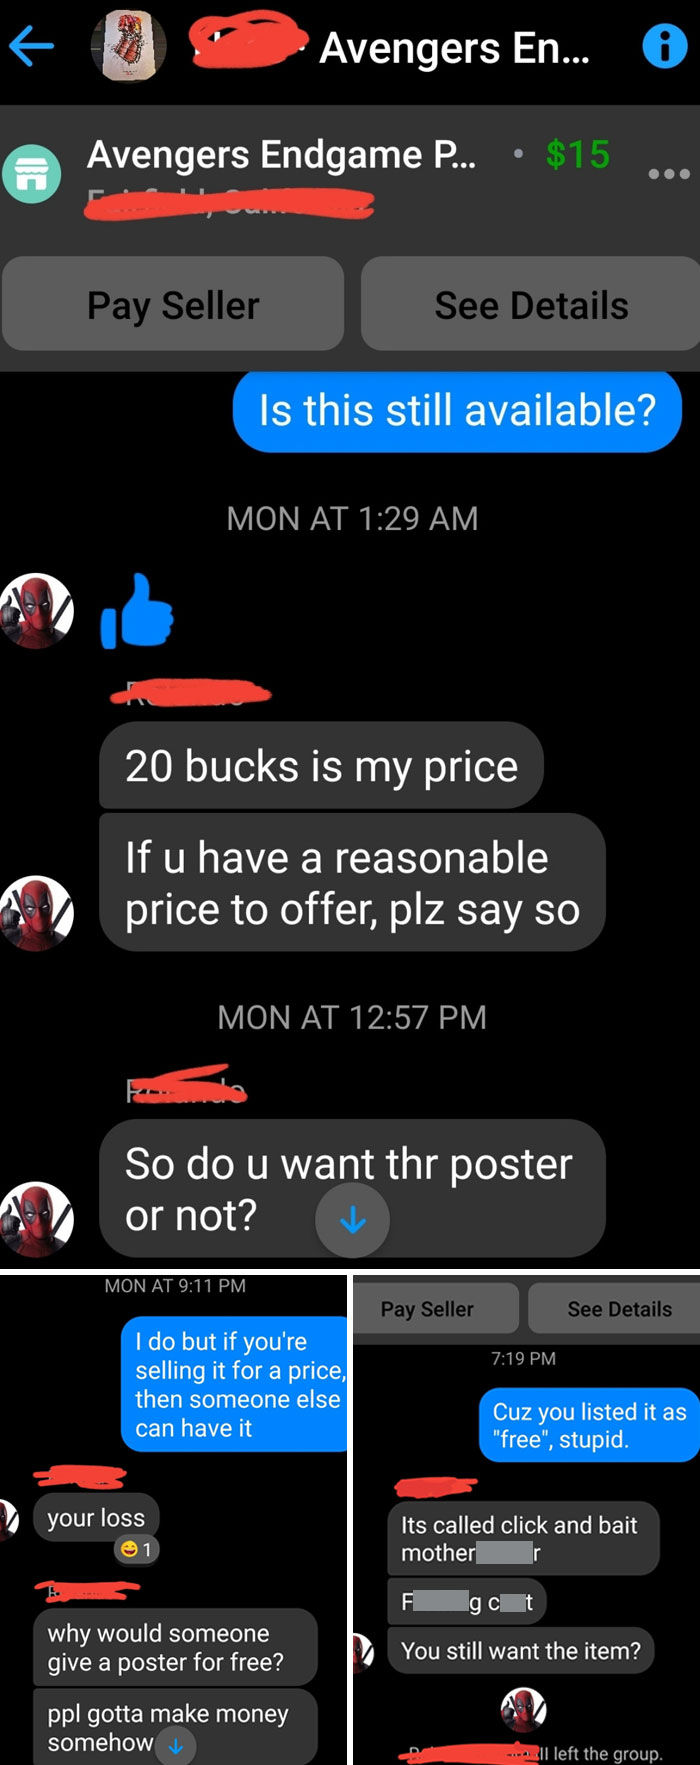 Guy On Facebook Marketplace A Listed Poster As "Free", Then Asks For $20 Dollars When I Ask If It's Available. He Calls It "Click And Bait"